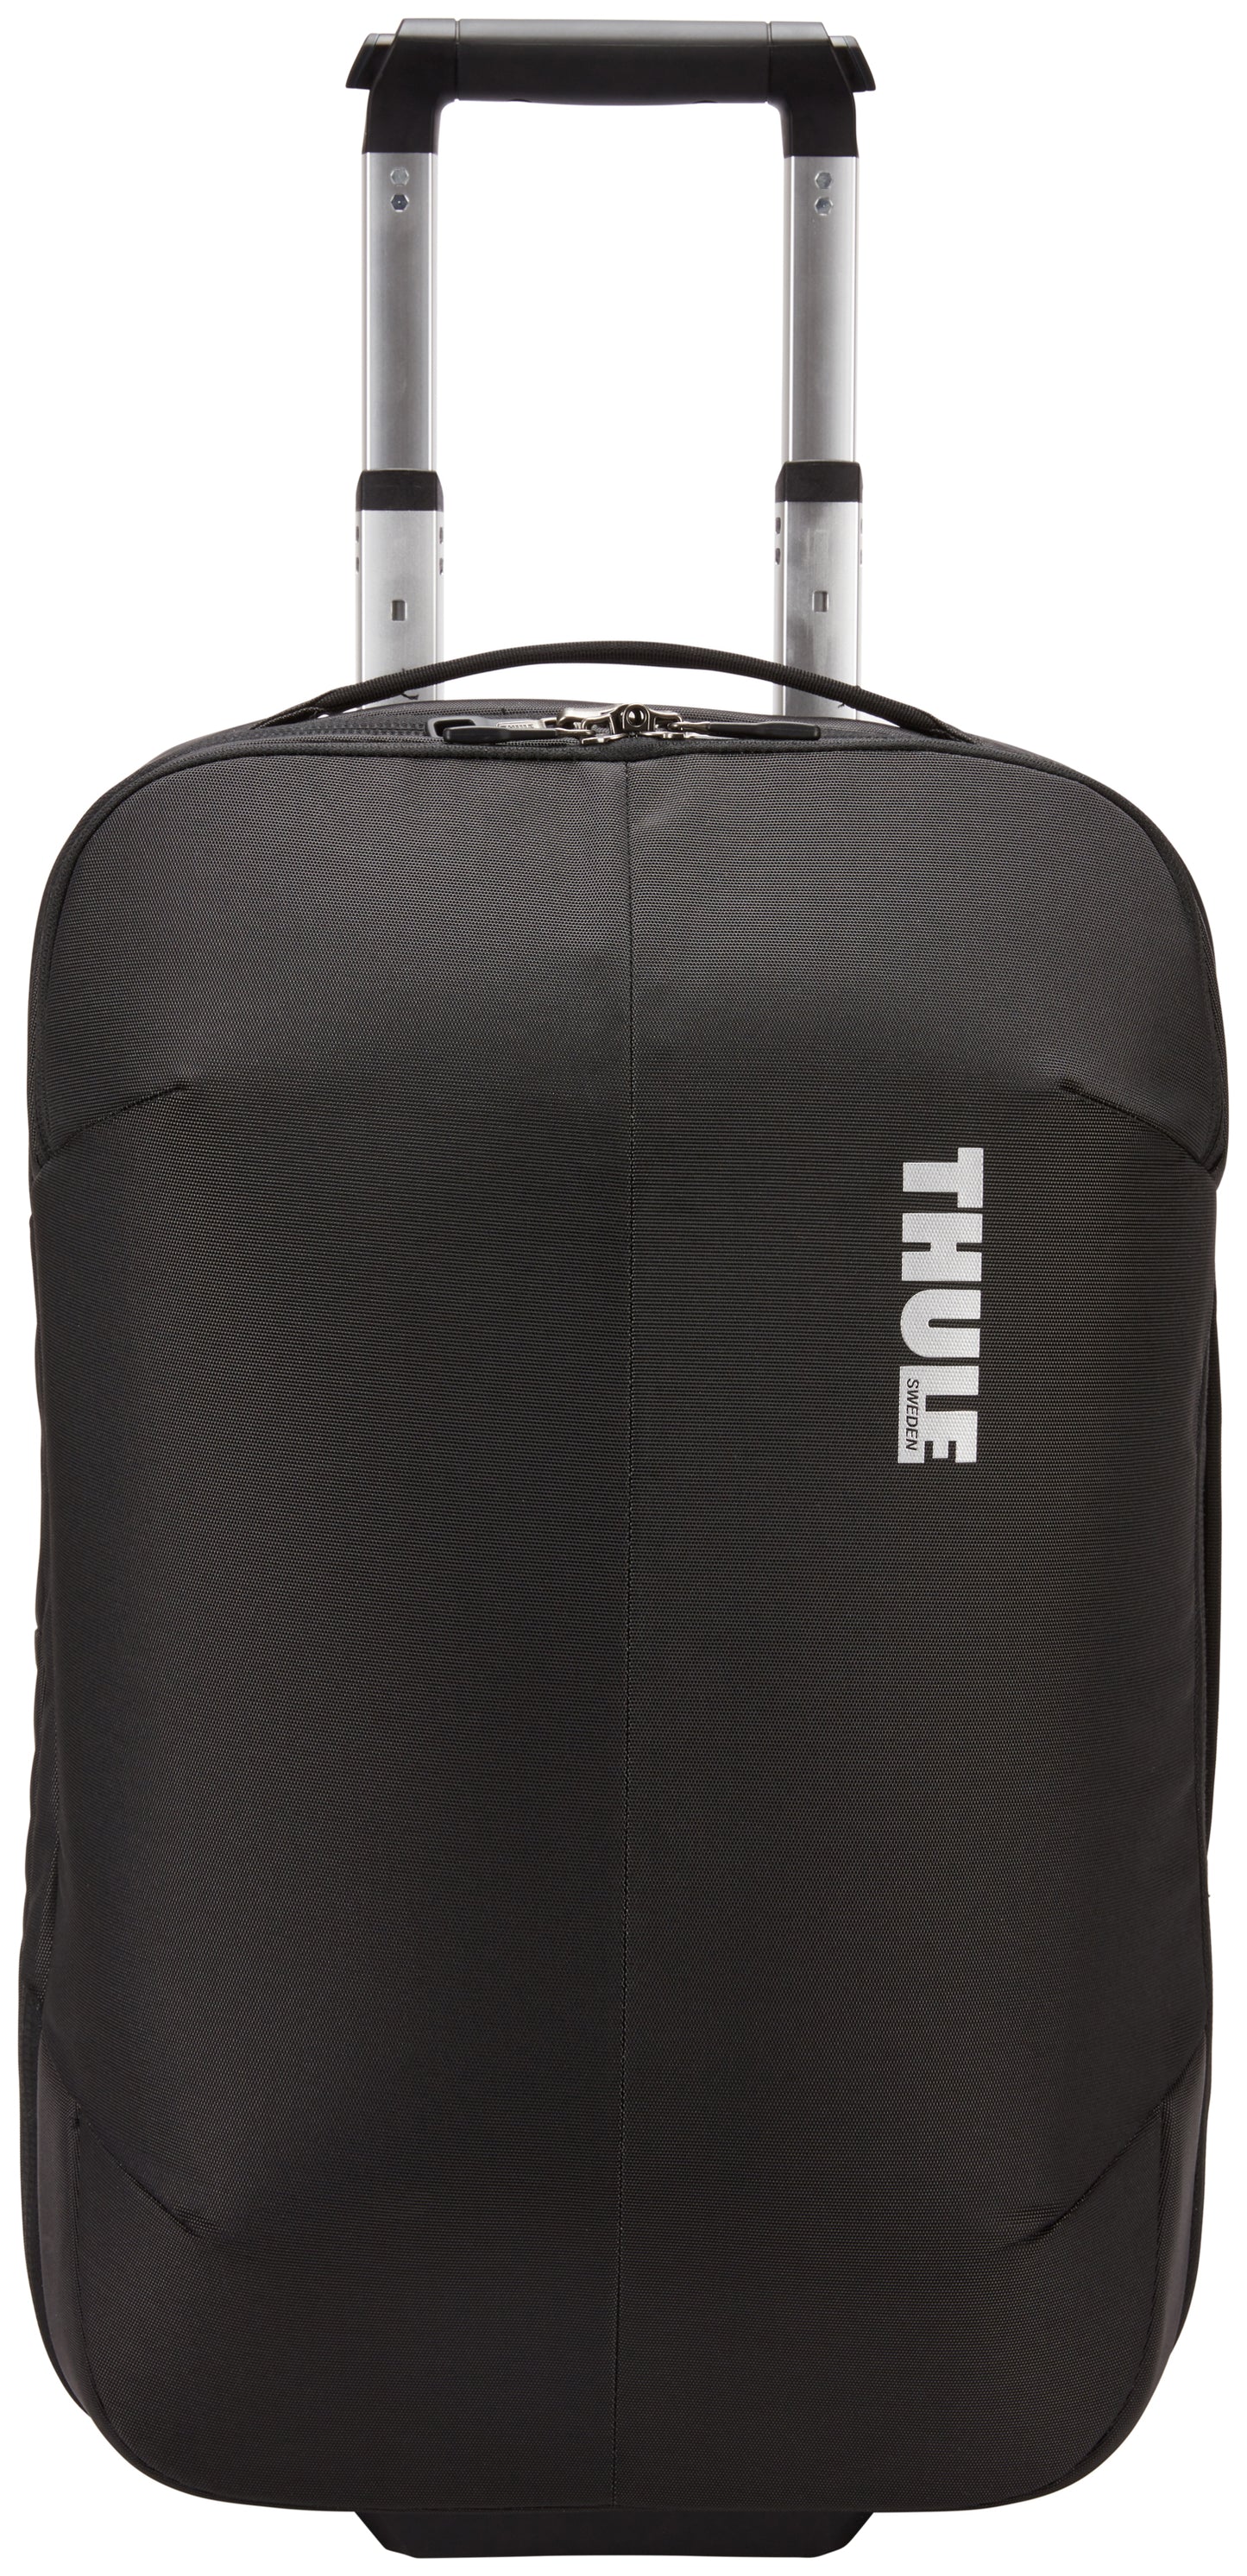 Hand Luggage Bag Thule Subterra Carry On 36L Black TSR-336